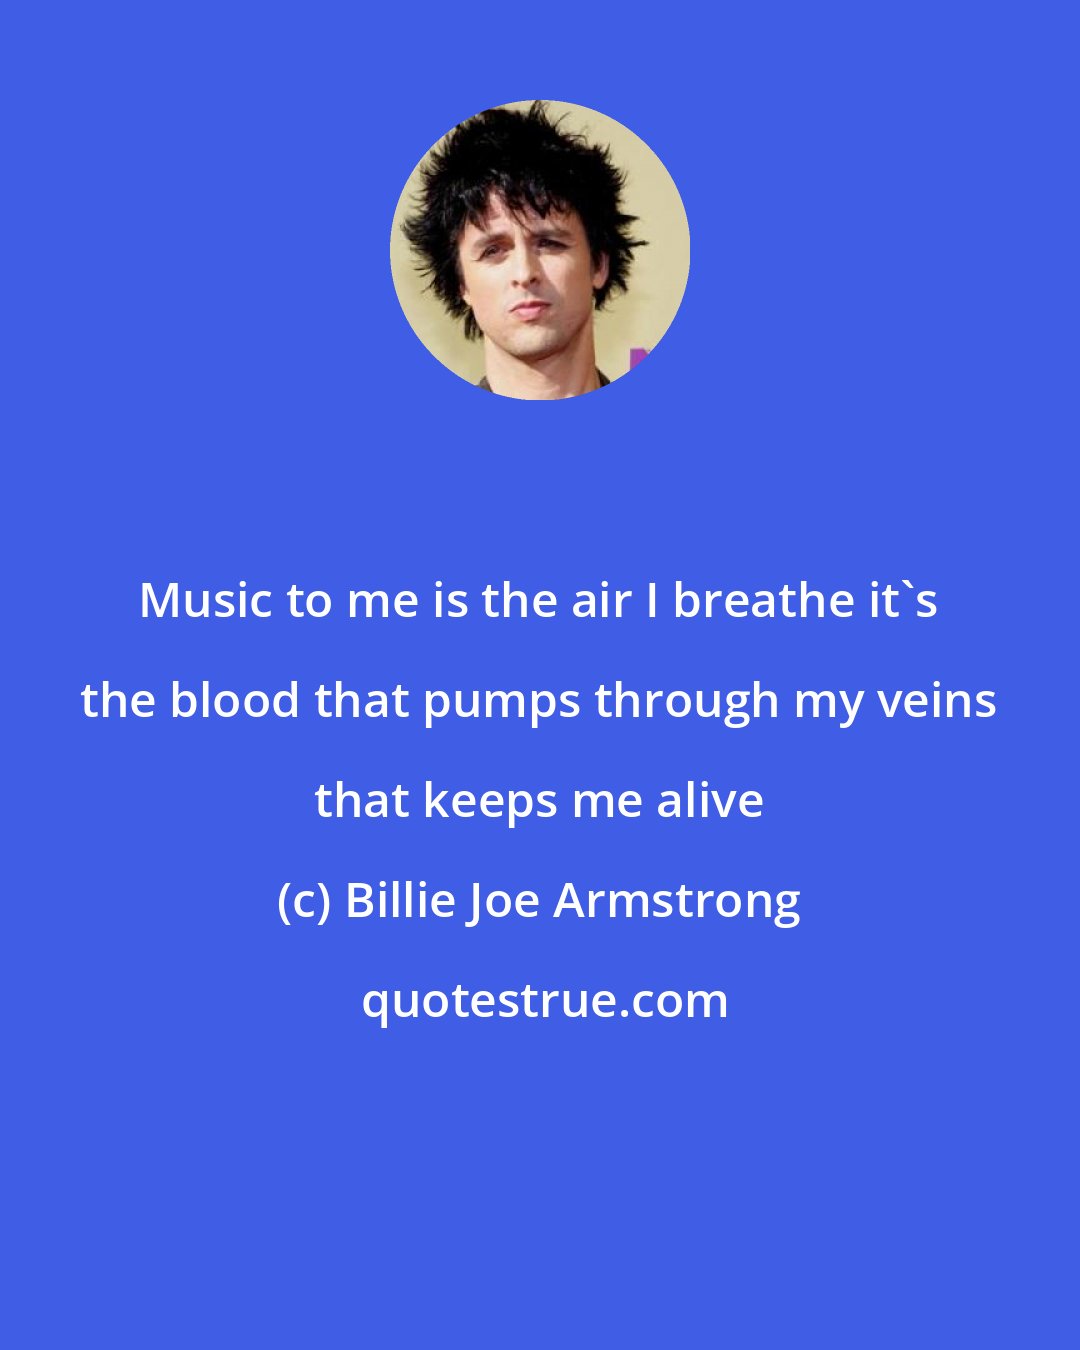 Billie Joe Armstrong: Music to me is the air I breathe it's the blood that pumps through my veins that keeps me alive